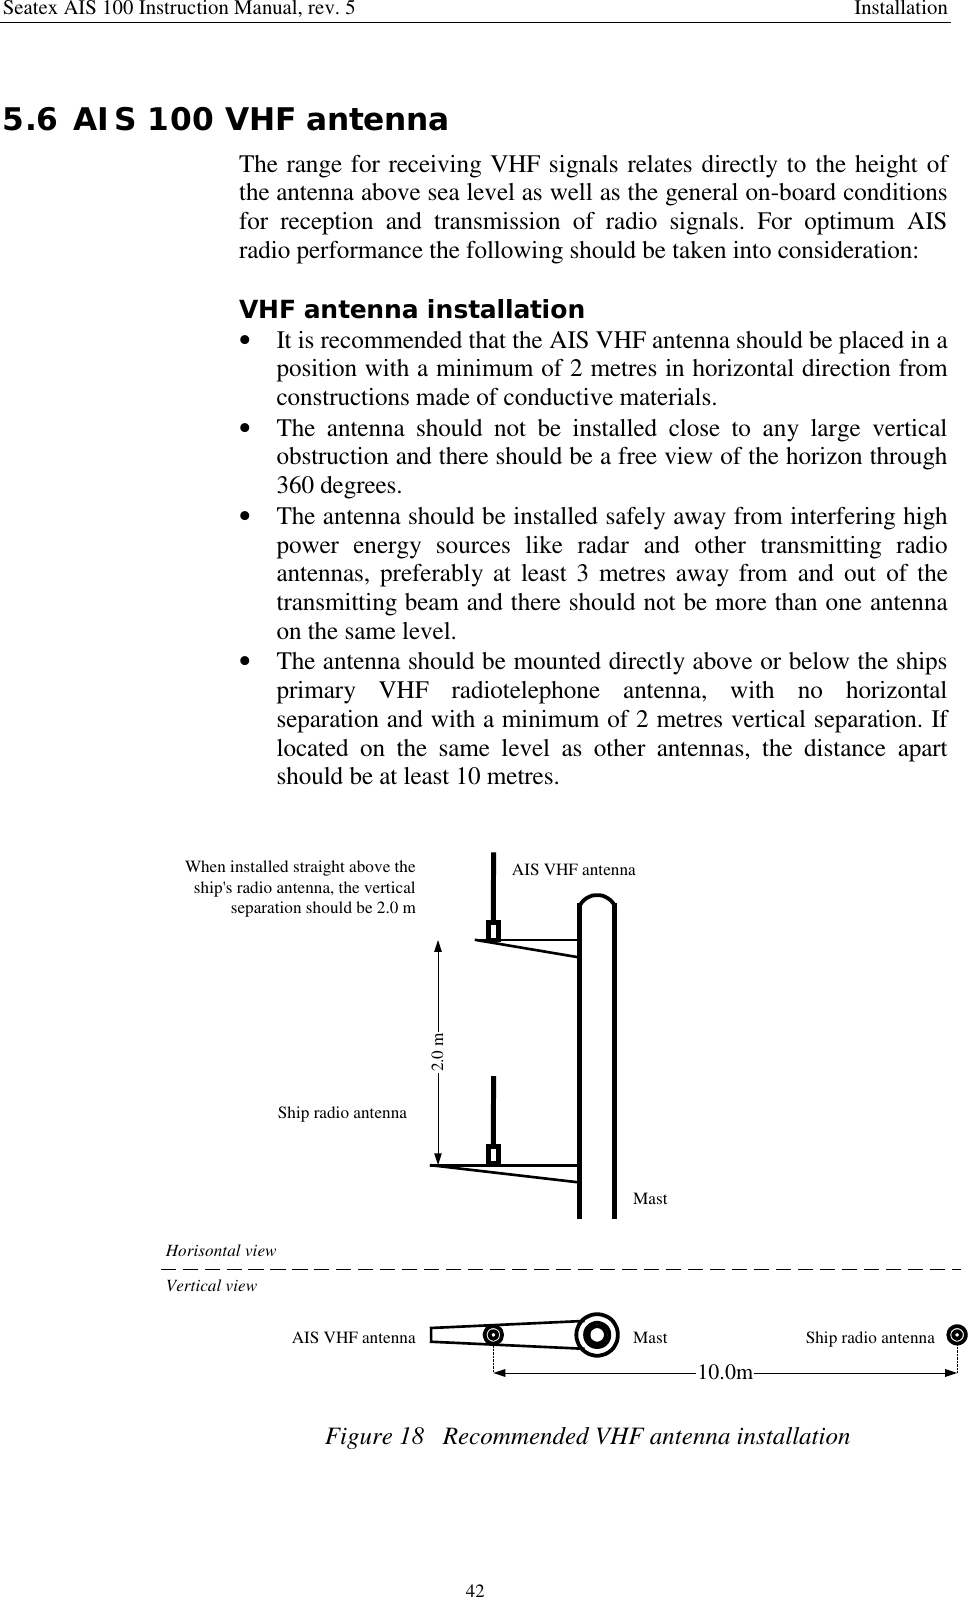 Seatex AIS 100 Instruction Manual, rev. 5 Installation425.6 AIS 100 VHF antennaThe range for receiving VHF signals relates directly to the height ofthe antenna above sea level as well as the general on-board conditionsfor reception and transmission of radio signals. For optimum AISradio performance the following should be taken into consideration:VHF antenna installation• It is recommended that the AIS VHF antenna should be placed in aposition with a minimum of 2 metres in horizontal direction fromconstructions made of conductive materials.• The antenna should not be installed close to any large verticalobstruction and there should be a free view of the horizon through360 degrees.• The antenna should be installed safely away from interfering highpower energy sources like radar and other transmitting radioantennas, preferably at least 3 metres away from and out of thetransmitting beam and there should not be more than one antennaon the same level.• The antenna should be mounted directly above or below the shipsprimary VHF radiotelephone antenna, with no horizontalseparation and with a minimum of 2 metres vertical separation. Iflocated on the same level as other antennas, the distance apartshould be at least 10 metres.Ship radio antennaAIS VHF antenna2.0 mWhen installed straight above theship&apos;s radio antenna, the verticalseparation should be 2.0 m10.0mMastVertical viewHorisontal viewMastAIS VHF antenna Ship radio antennaFigure 18   Recommended VHF antenna installation